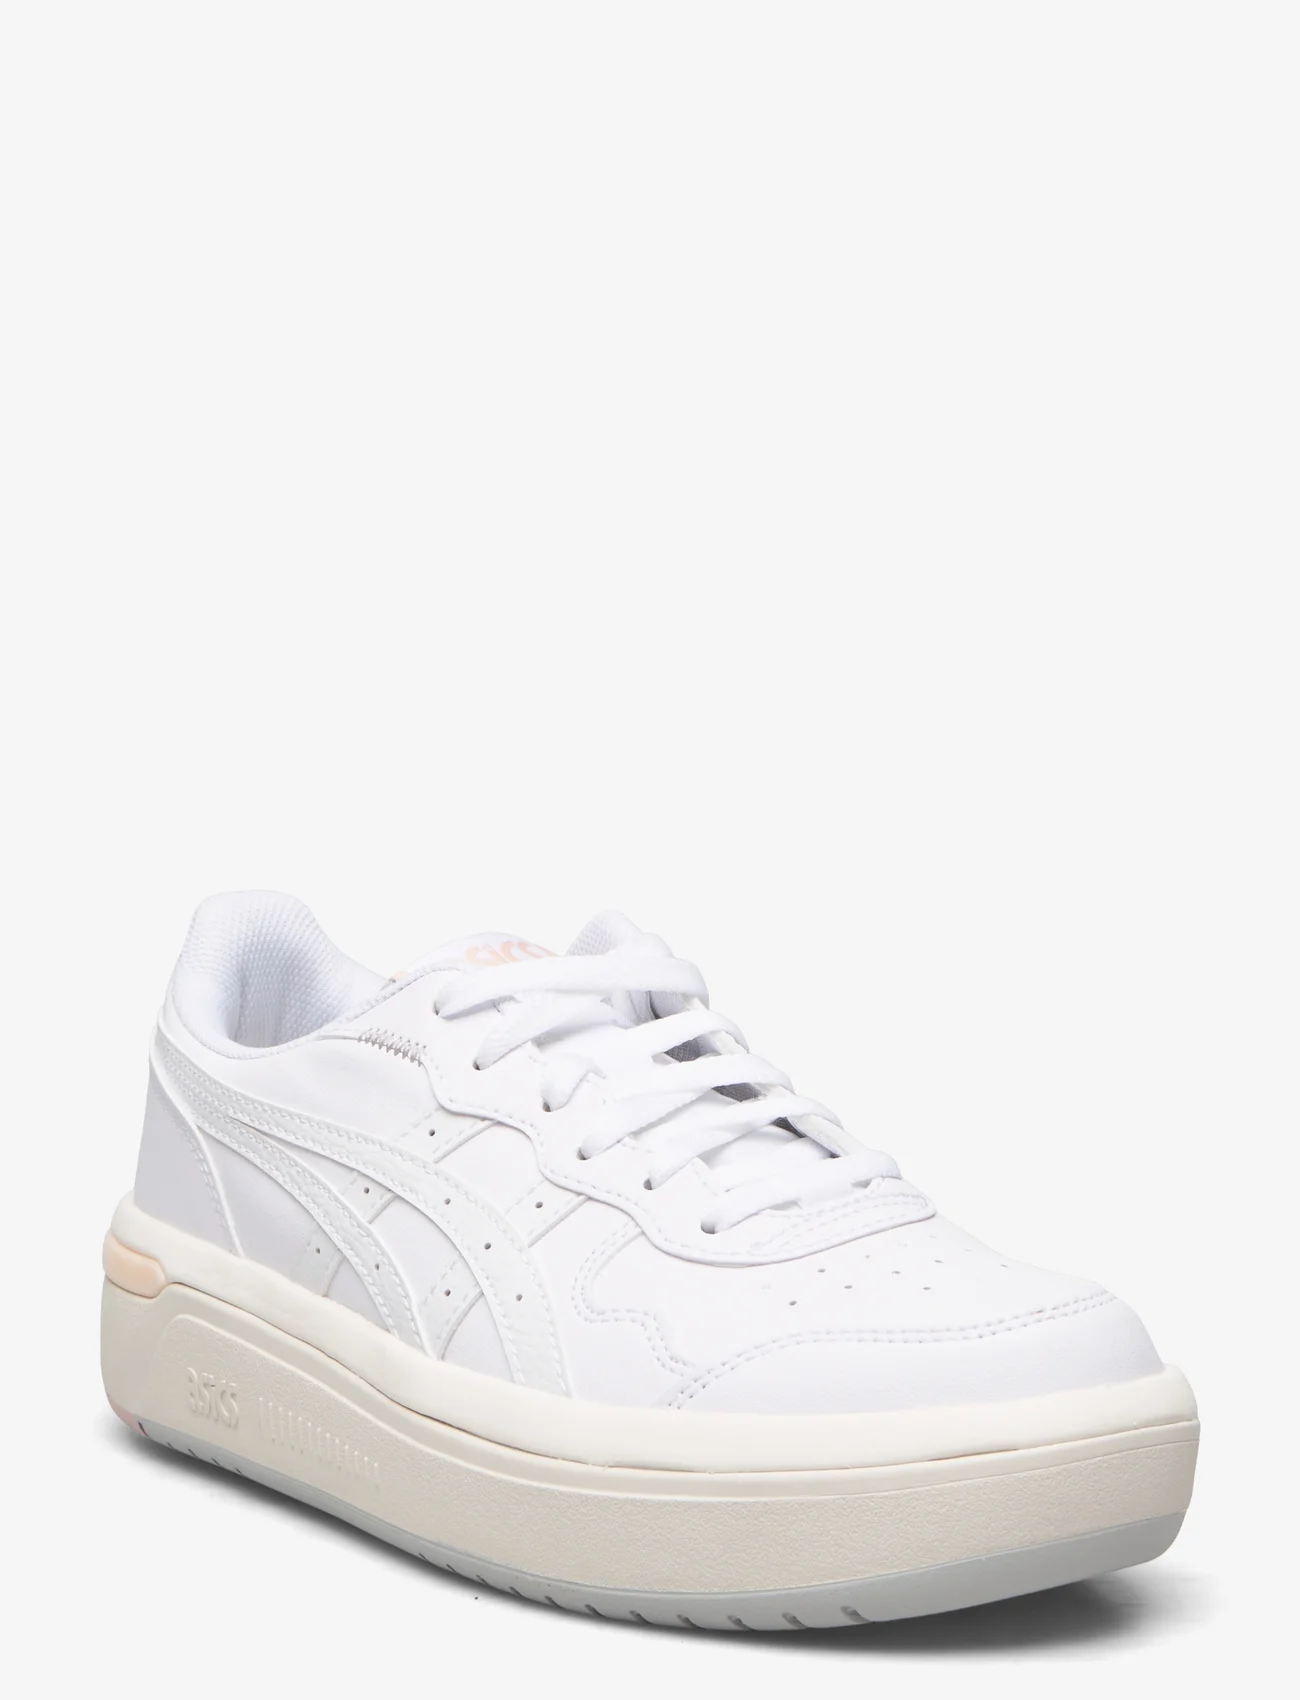 Asics - JAPAN S ST - low top sneakers - white/maple sugar - 0